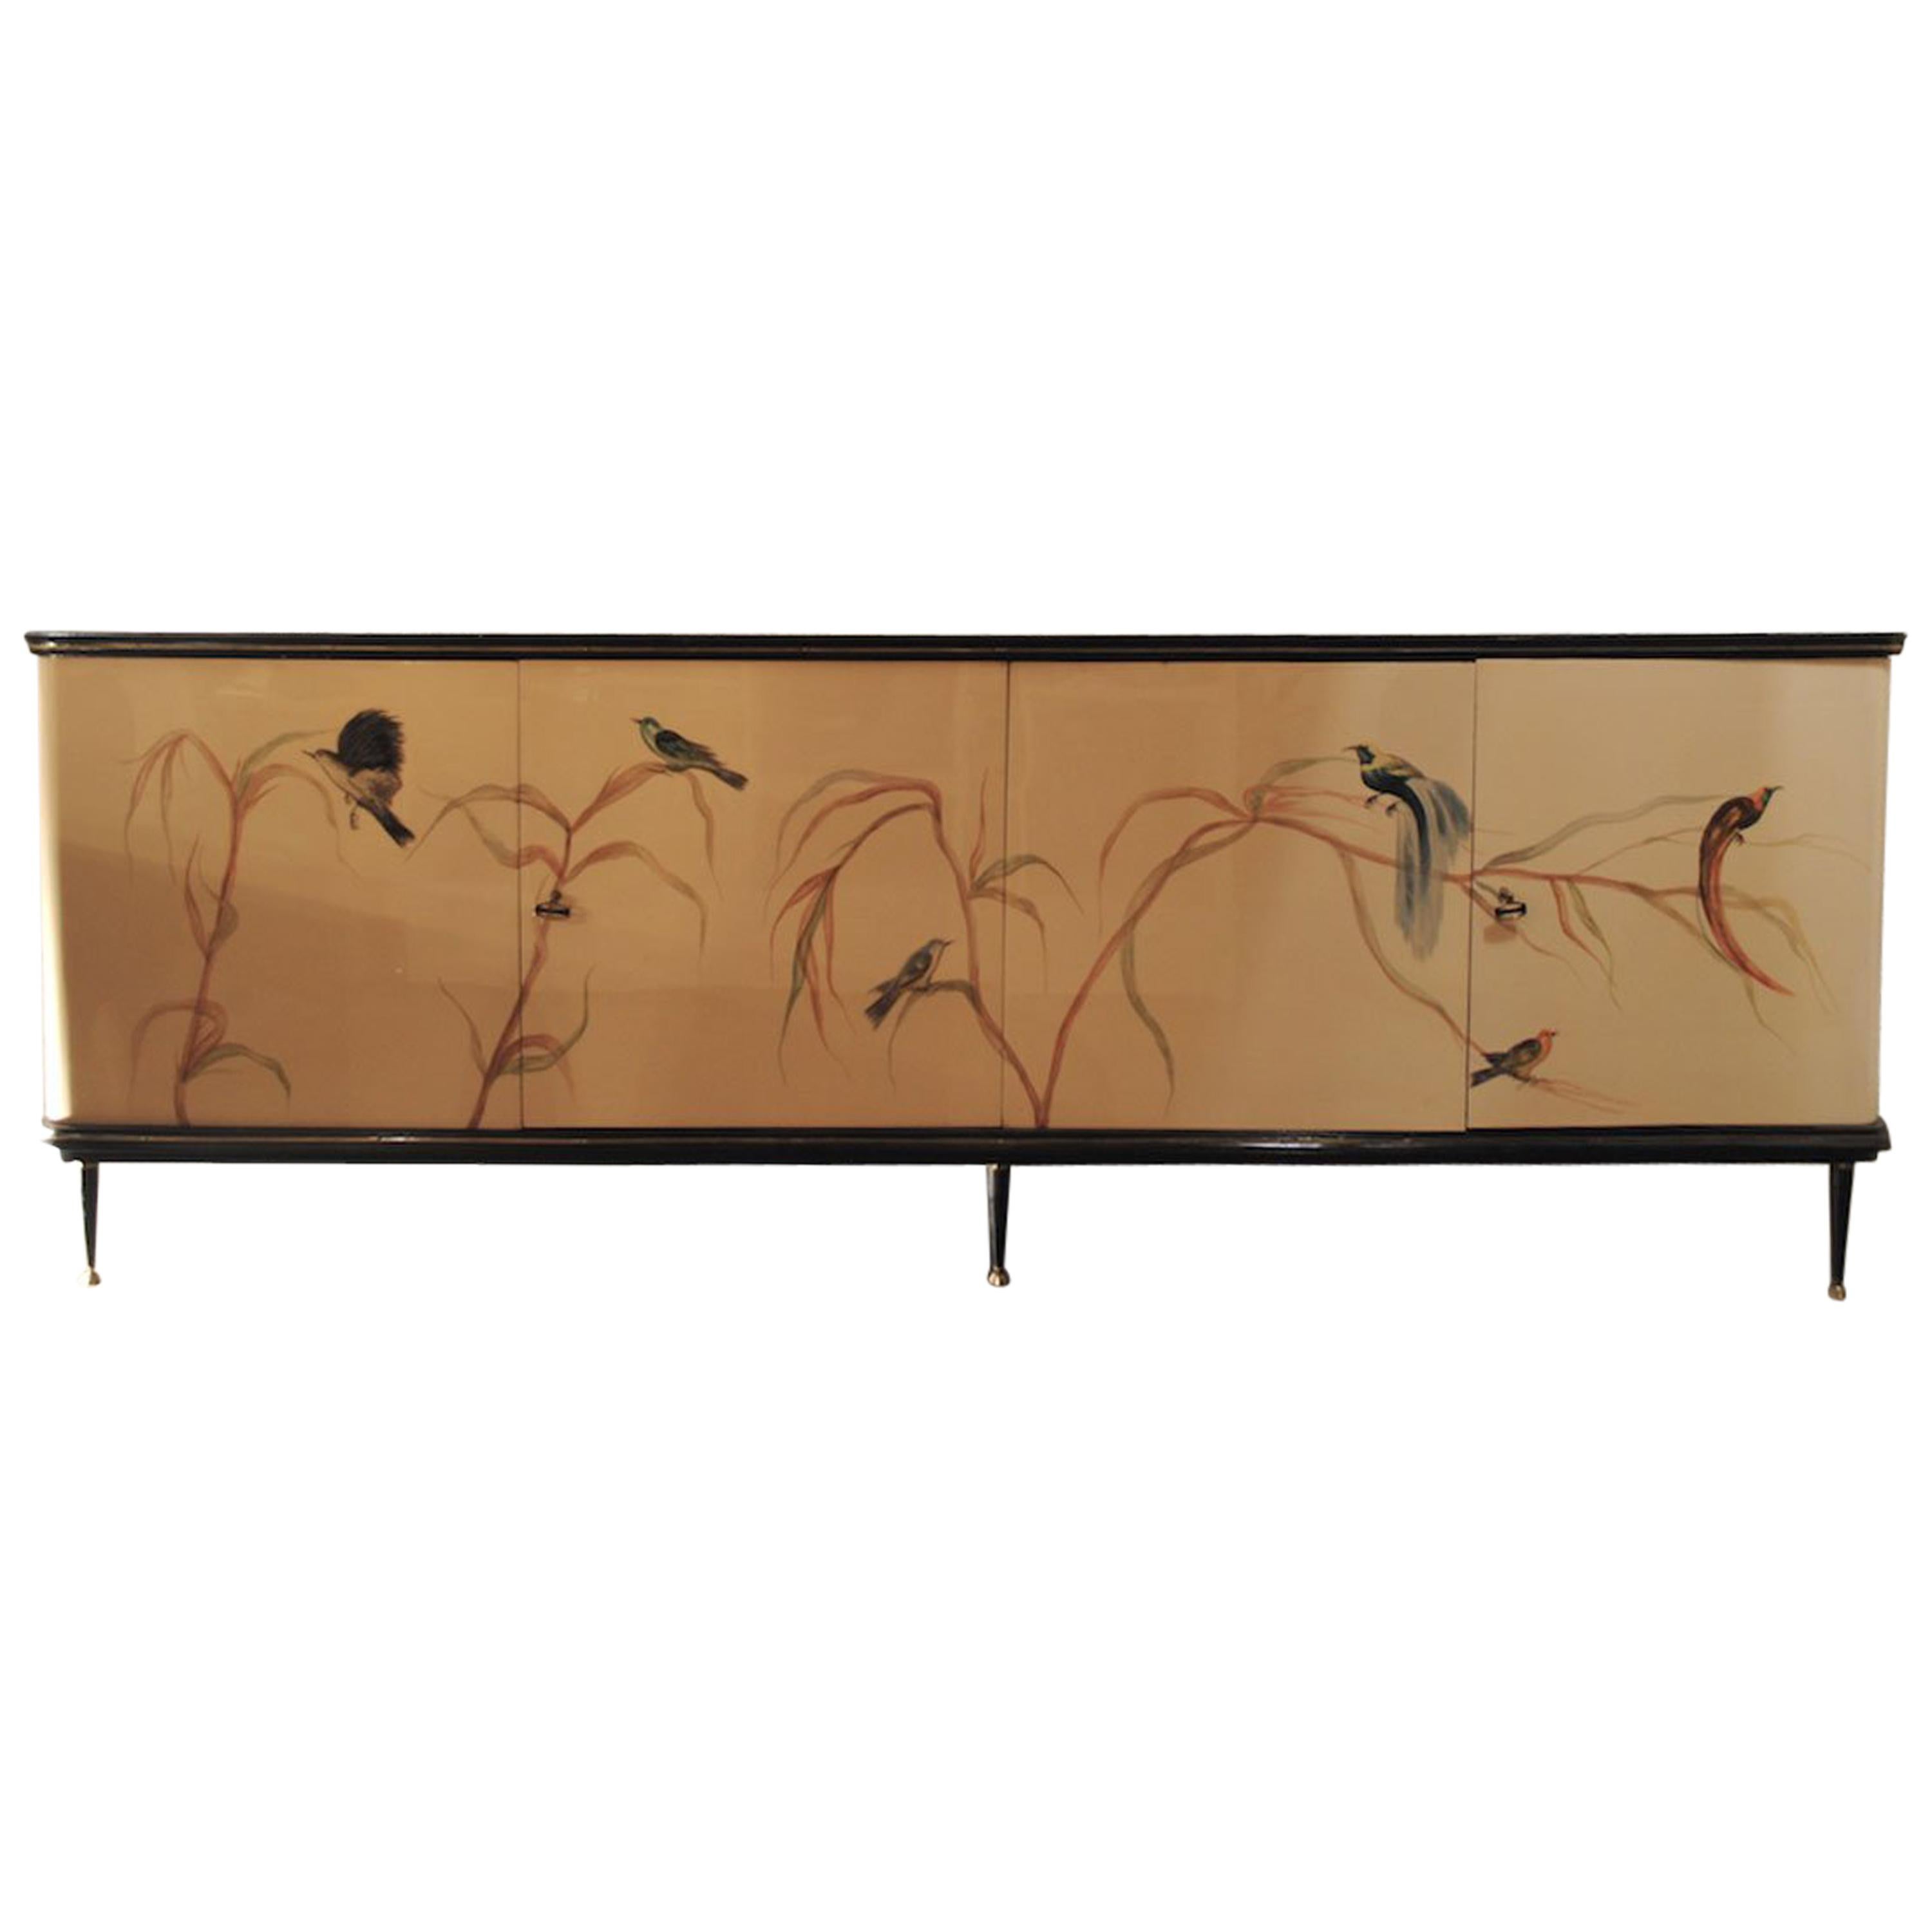 Italian 50s production cabinet sideboard with decorated doors